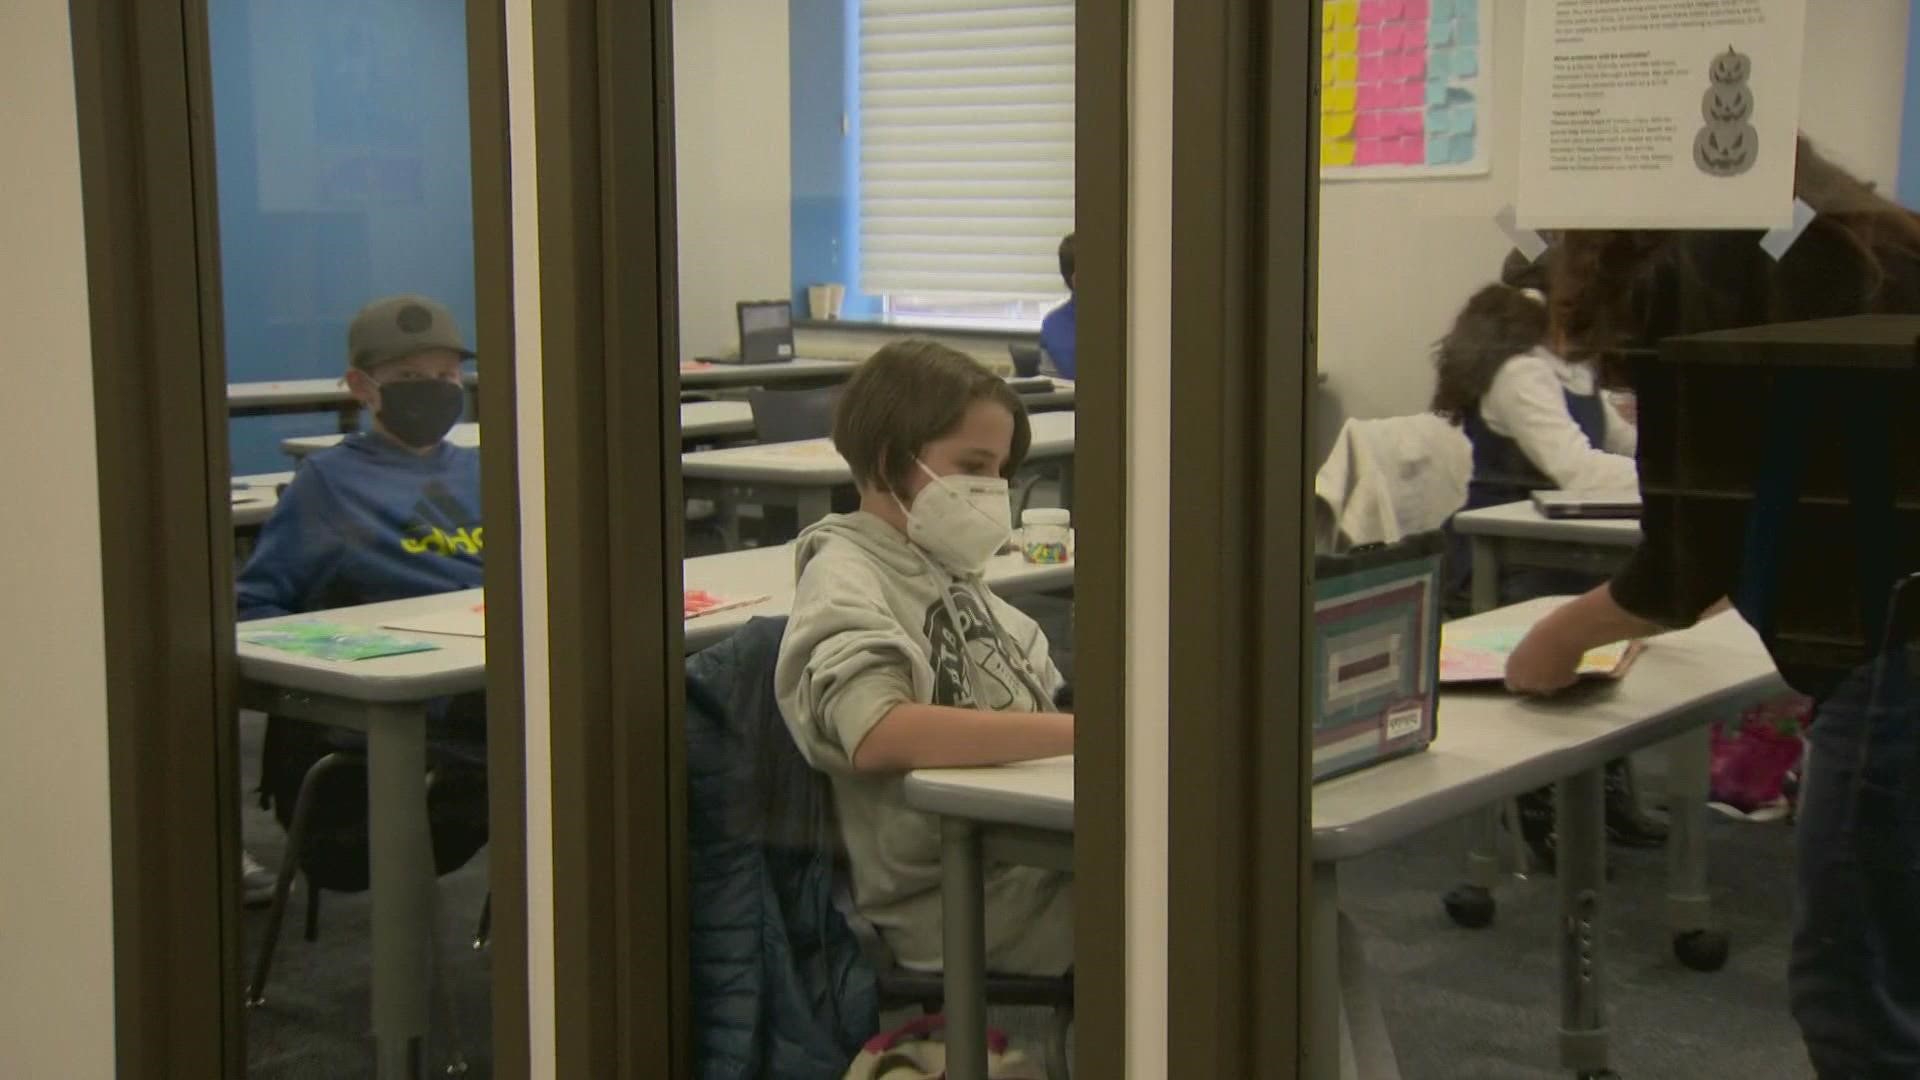 We are in the window of time after the holidays where there are concerns about the flu and COVID-19 spreading. Some U.S. schools are reconsidering mask mandates.